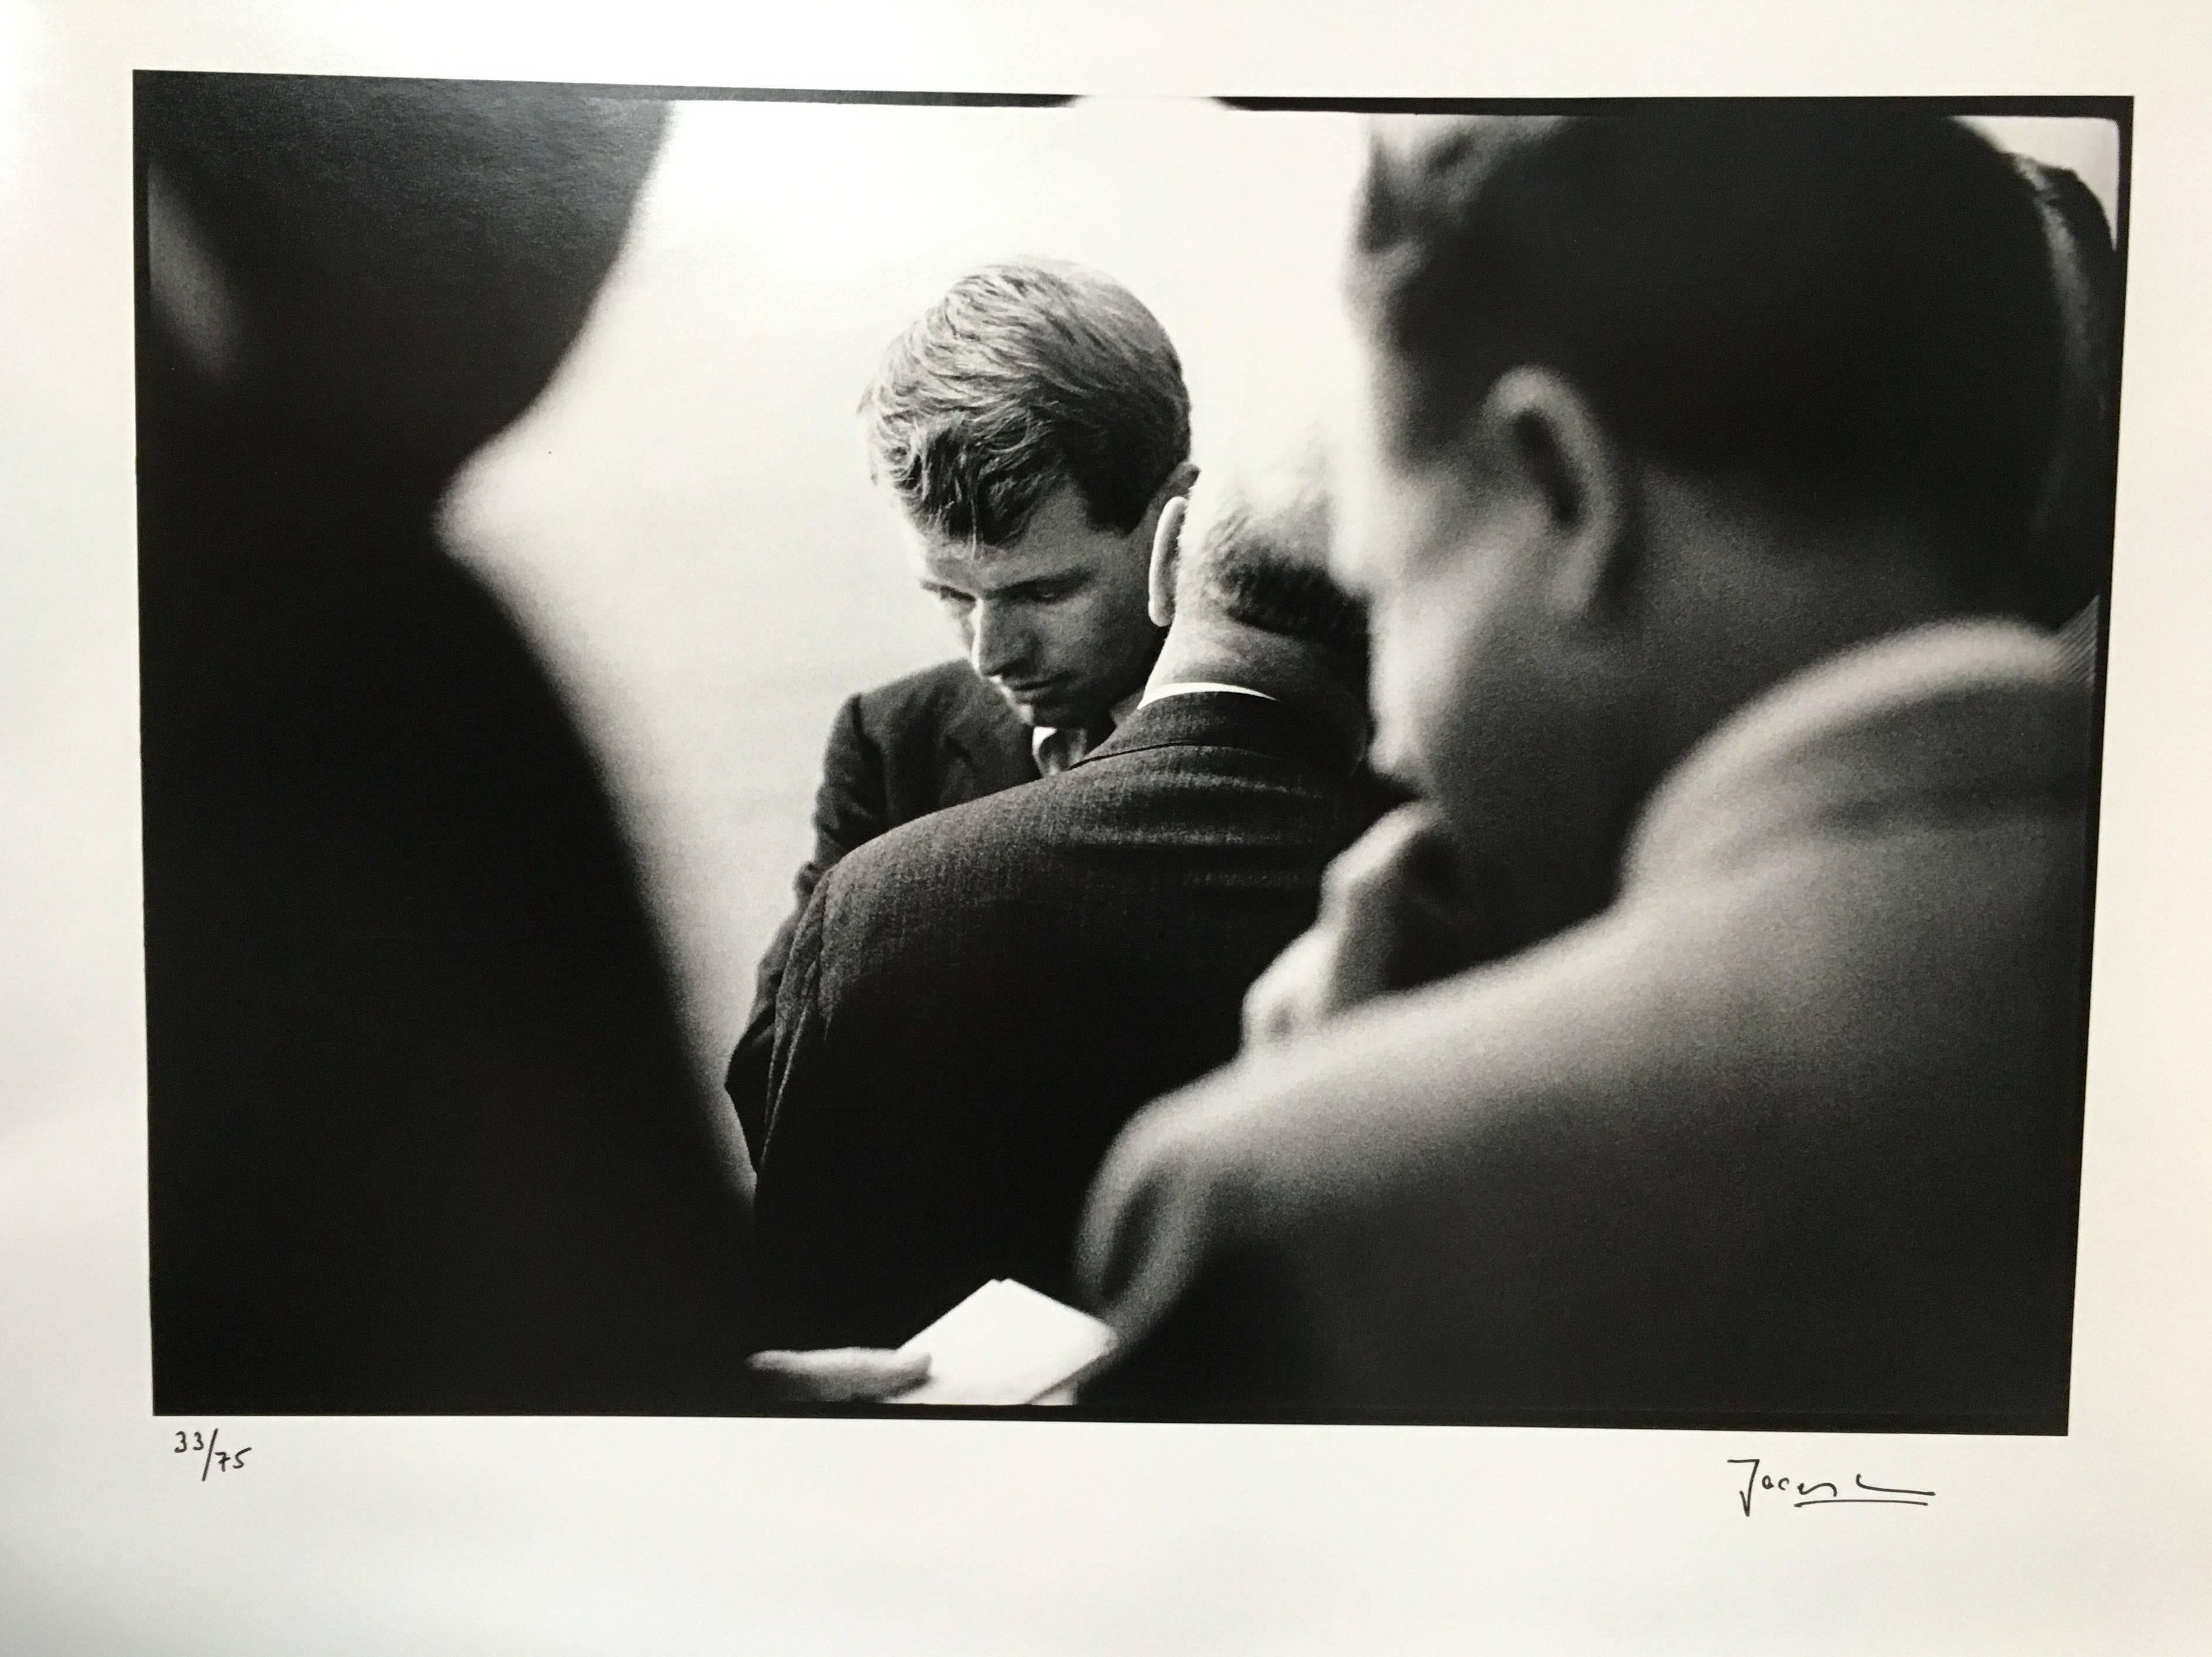 Huddle, Democratic Convention, Los Angeles - Photograph by Jacques Lowe